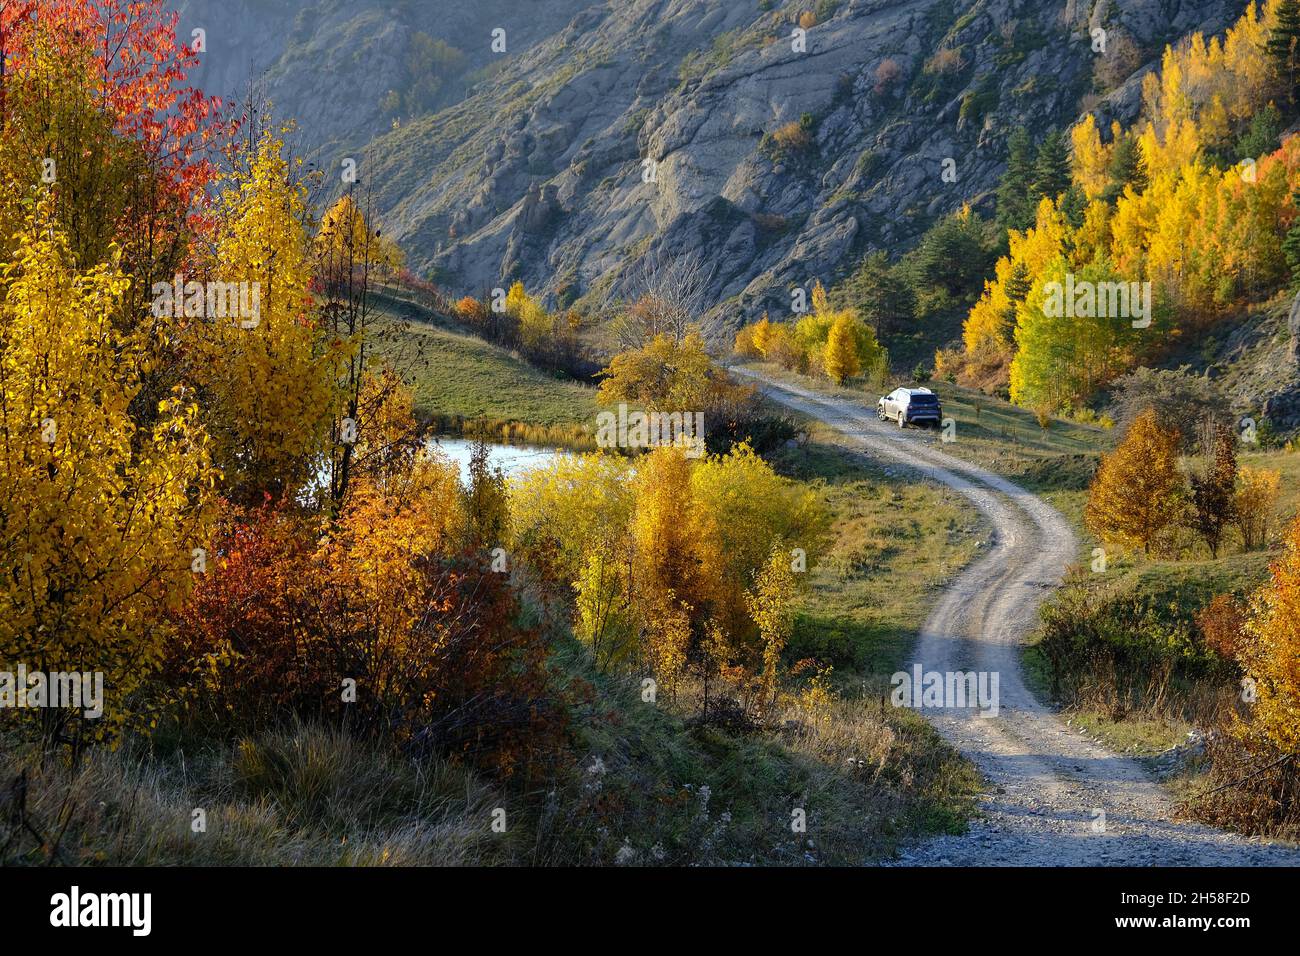 Şavşat district of Artvin province offers wonderful views to its visitors in autumn. Stock Photo